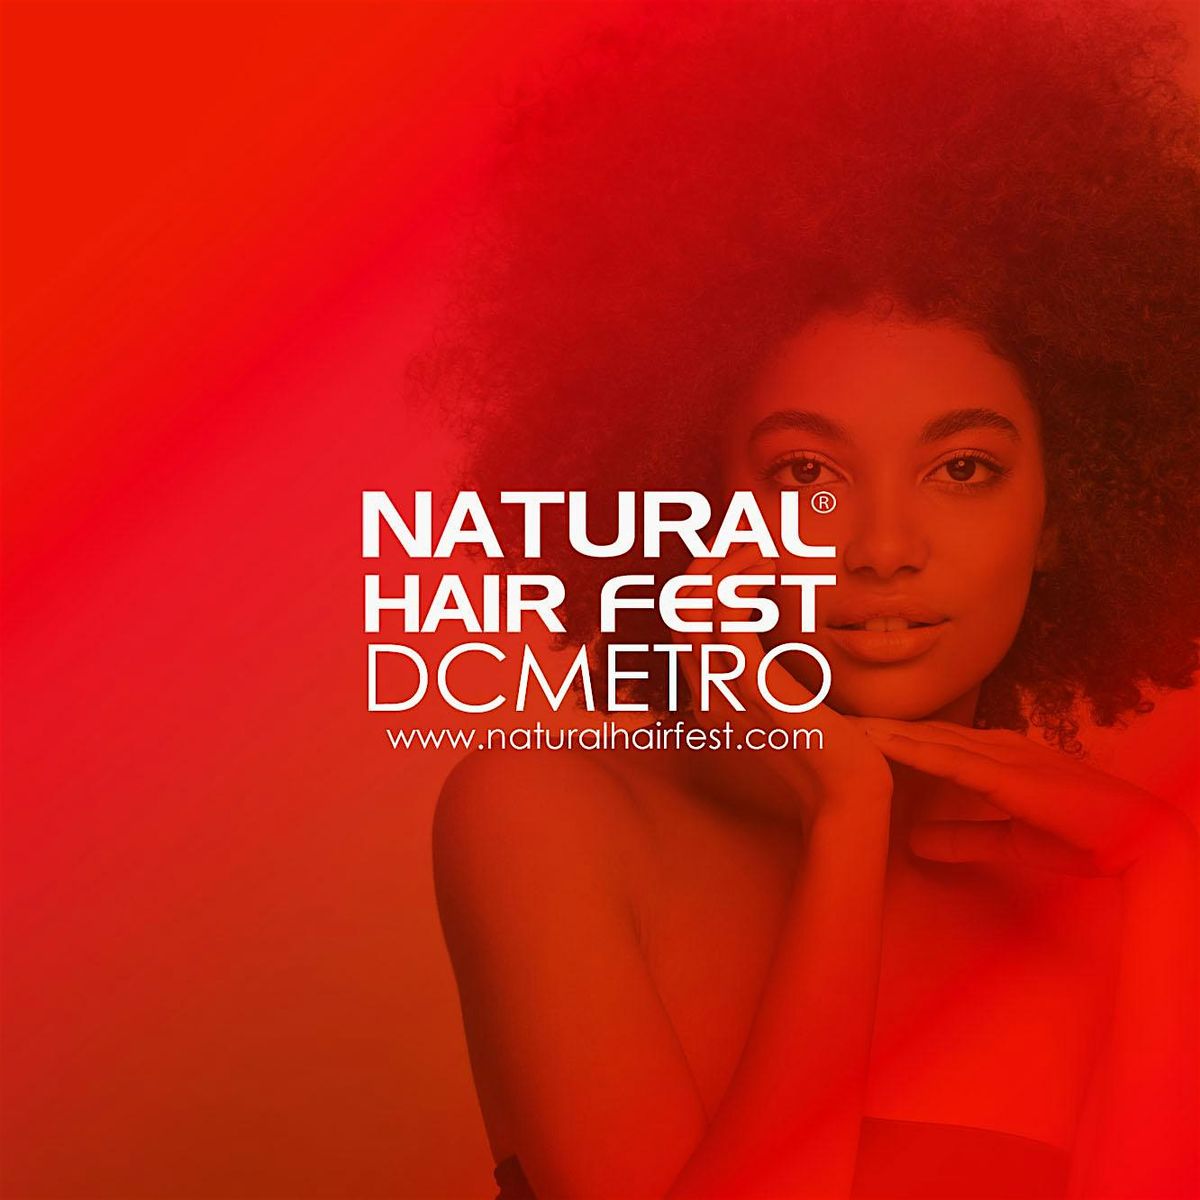 Natural Hair Fest DC Metro has Vendor Space Available EARLY BIRD SPECIAL